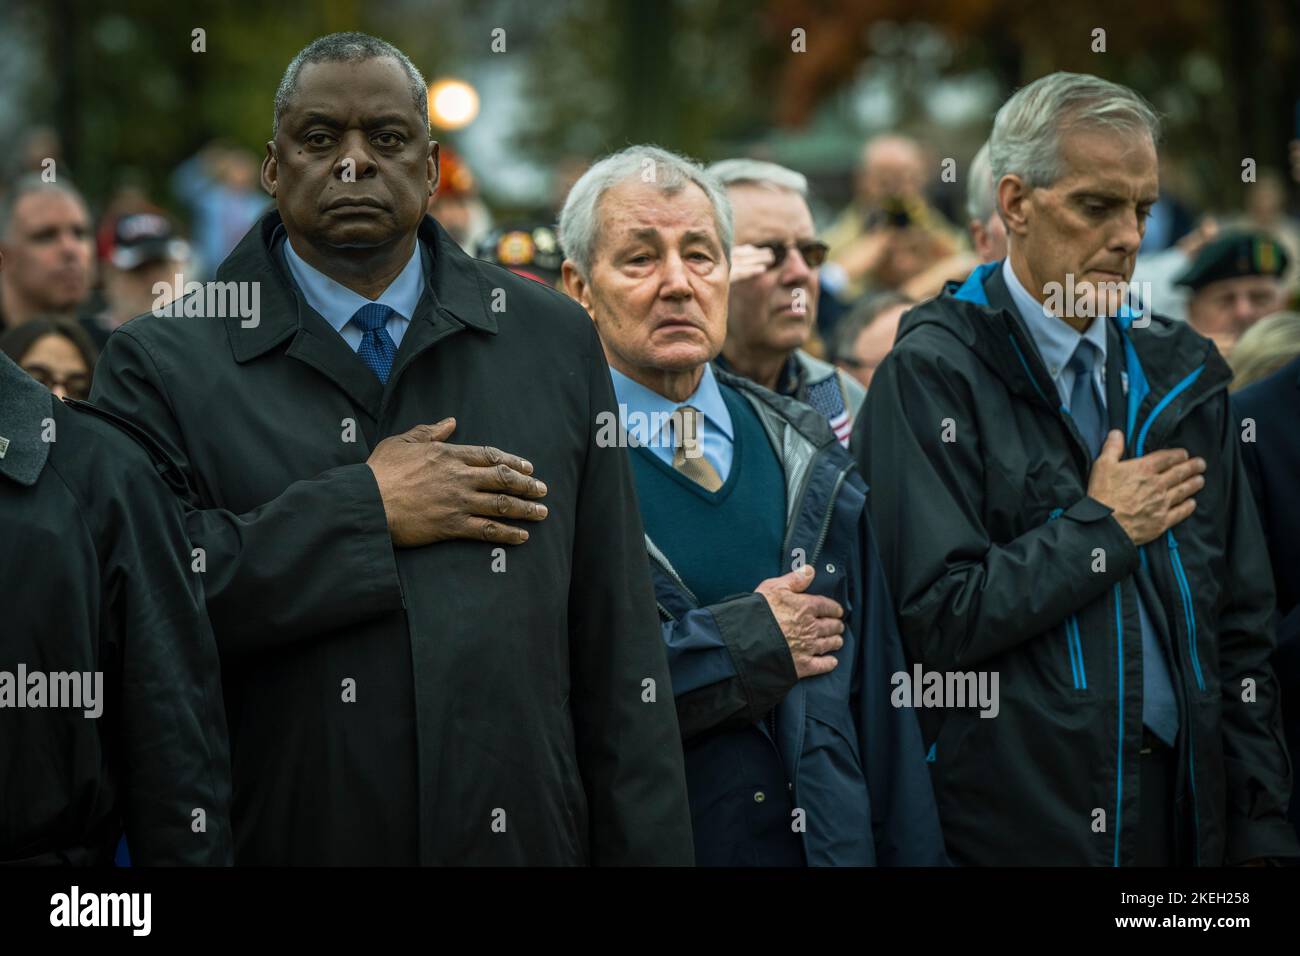 Washington, United States Of America. 11th Nov, 2022. Washington, United States of America. 11 November, 2022. U.S. Secretary of Defense Lloyd J. Austin III, left, stands for the national anthem alongside former Secretary of Defense, Chuck Hagel, center, and Secretary of the Veterans Administration, Denis McDonough during the Veterans Day Observance at the Vietnam Veterans Memorial, November 11, 2022 in Washington, DC The day marked the 40th anniversary of the memorial dedication. Credit: Chad J. McNeeley/DOD Photo/Alamy Live News Stock Photo